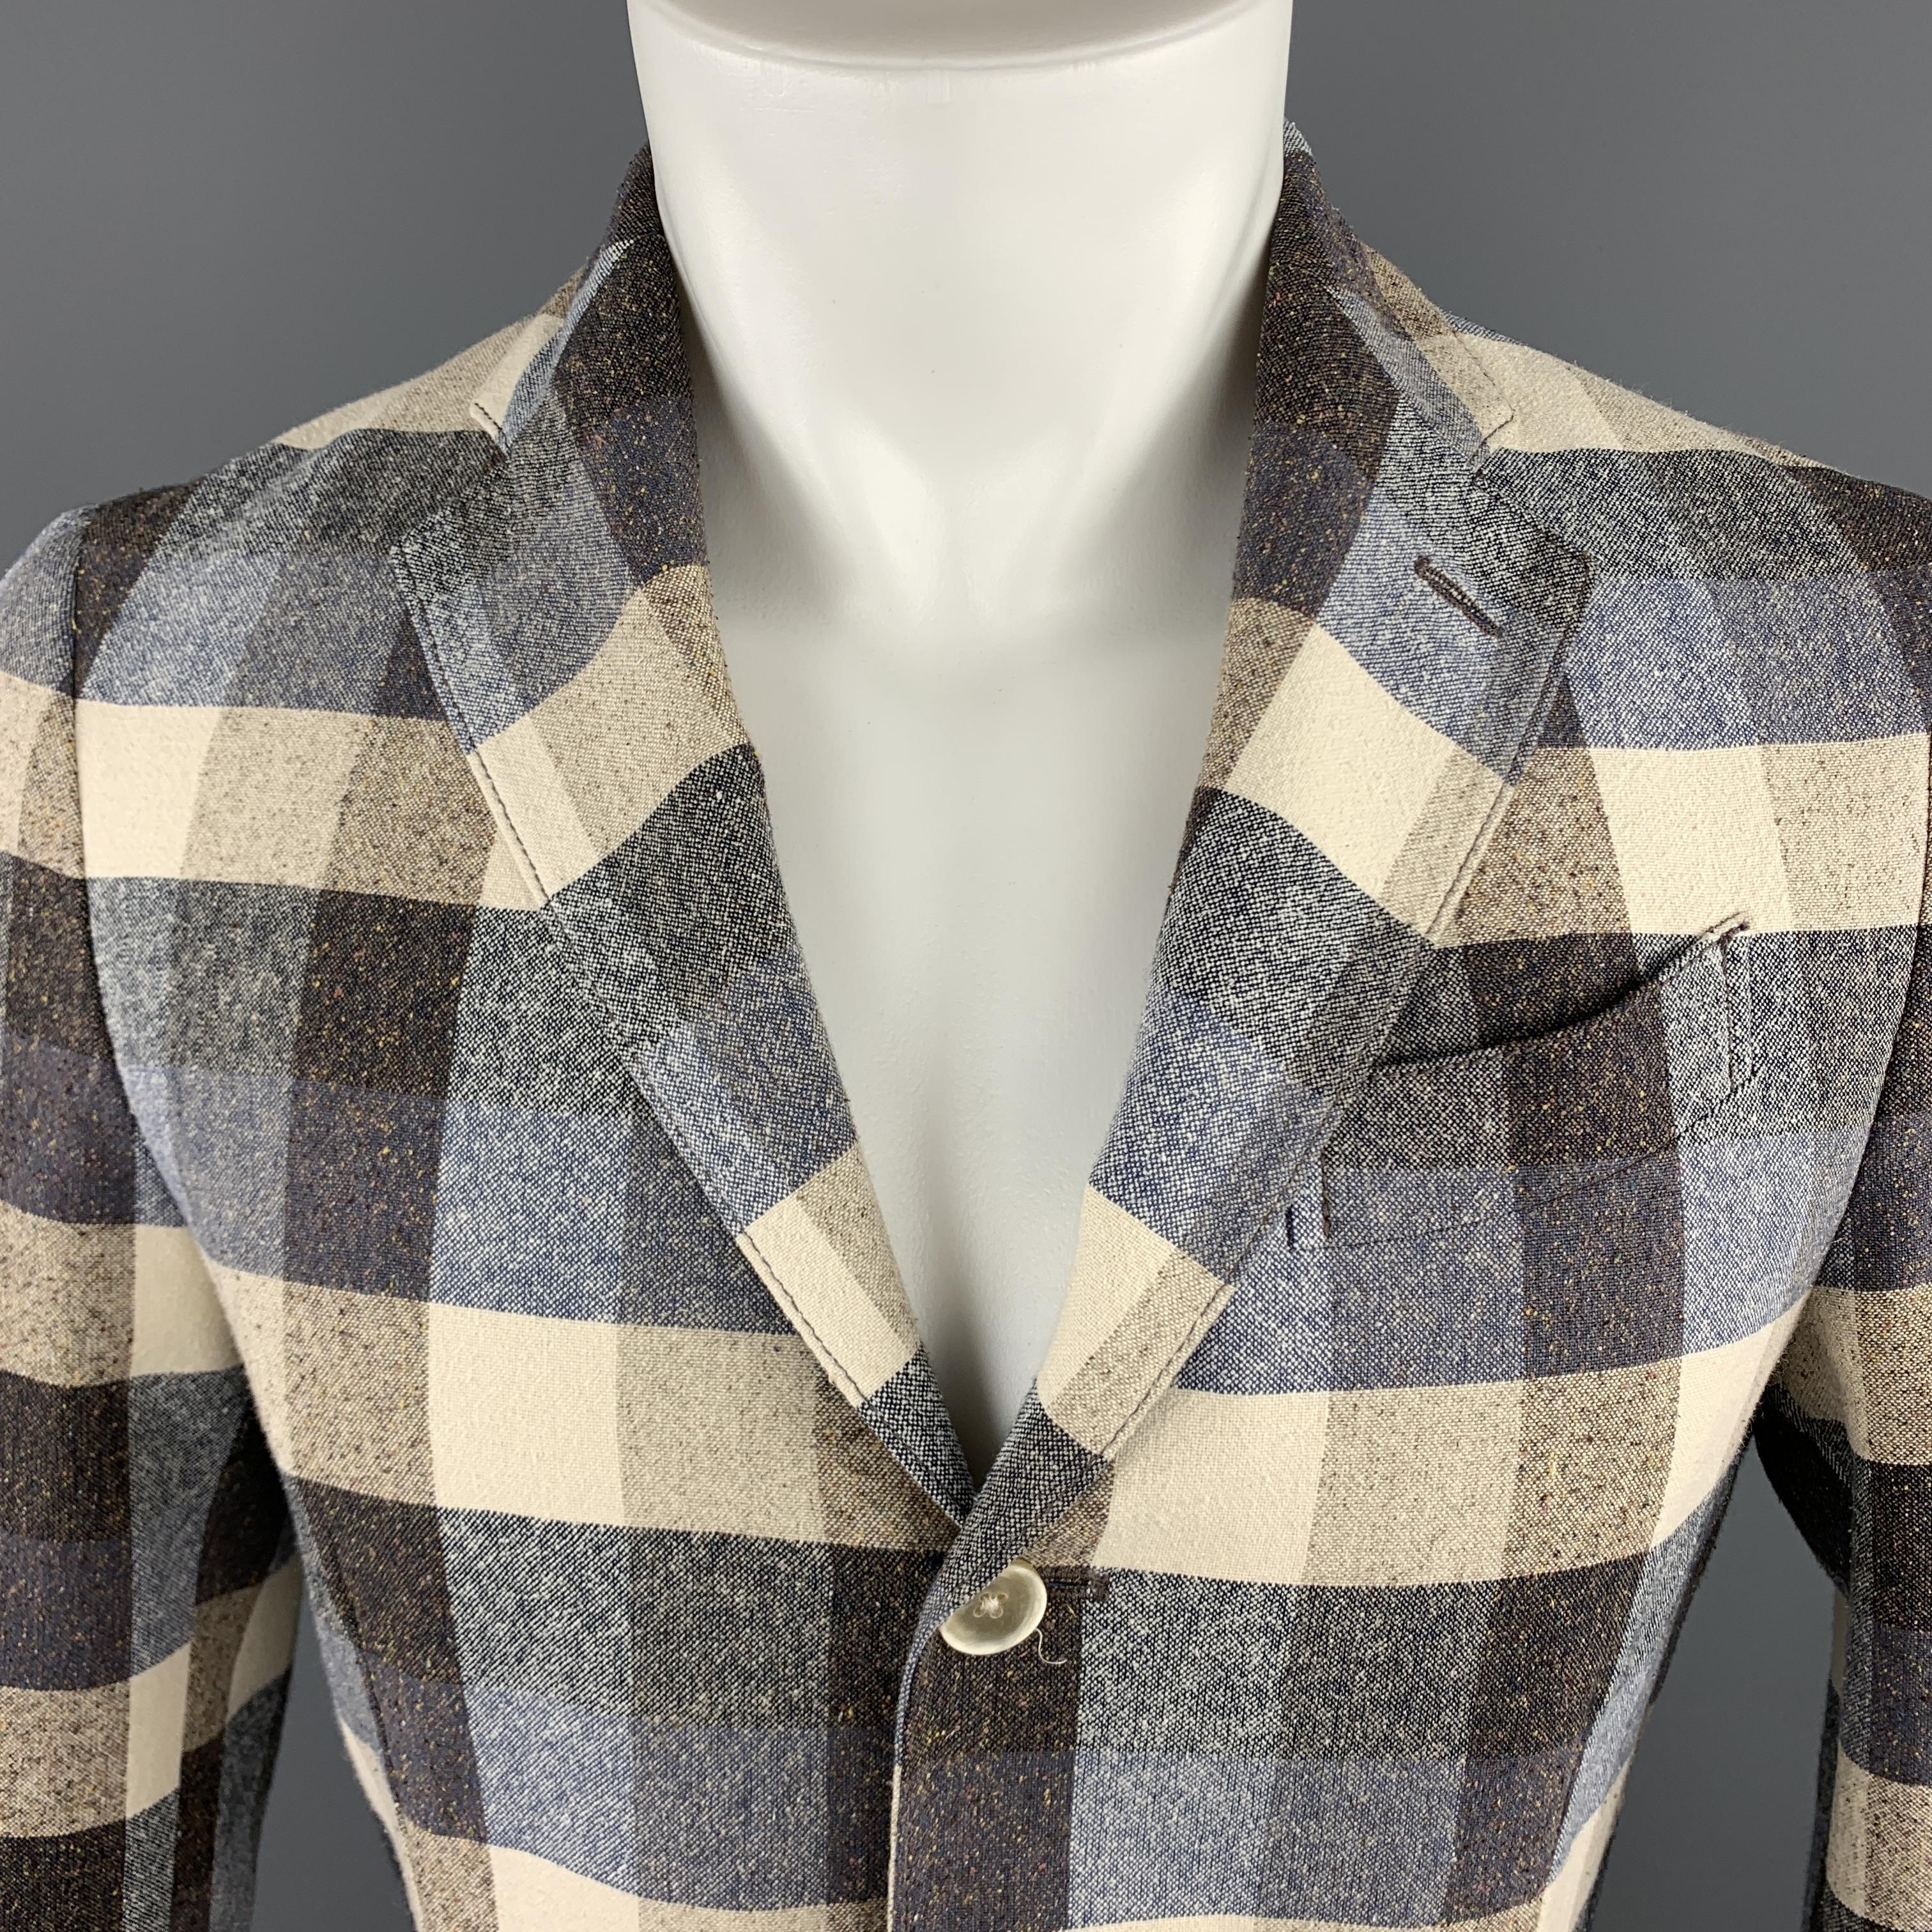 LARDINI sport coat comes in blue, beige, and taupe checkered plaid textured cotton silk blend fabric with a notch lapel, single breasted, three button front, and Patch pockets. Made in Italy.

Excellent Pre-Owned Condition.
Marked: IT